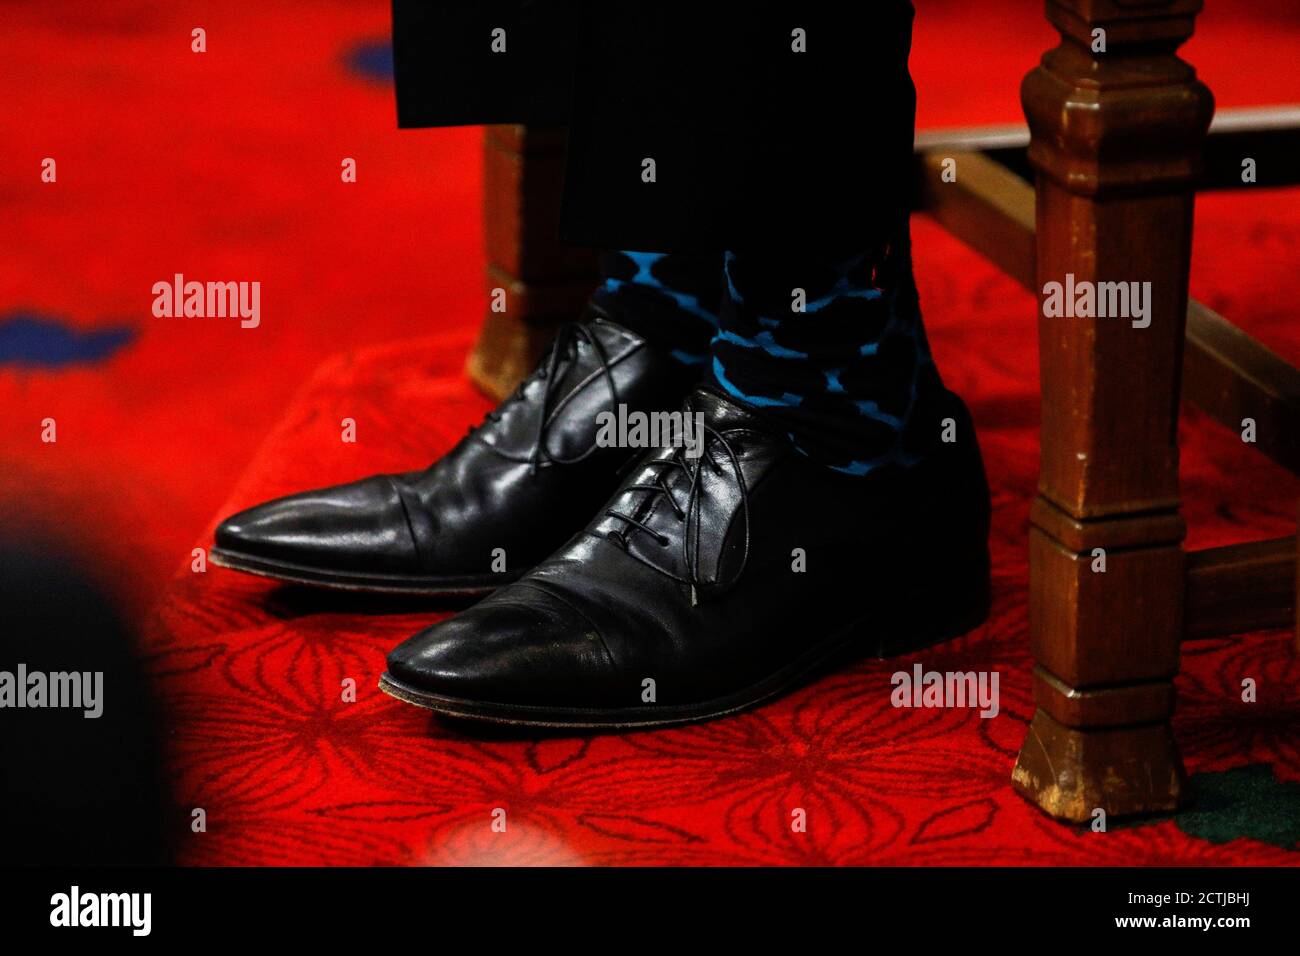 The shoes and socks of Canada's Prime Minister Justin Trudeau are seen  during the Throne Speech in the Senate, as parliament prepares to resume in  Ottawa, Ontario, Canada September 23, 2020. REUTERS/Blair